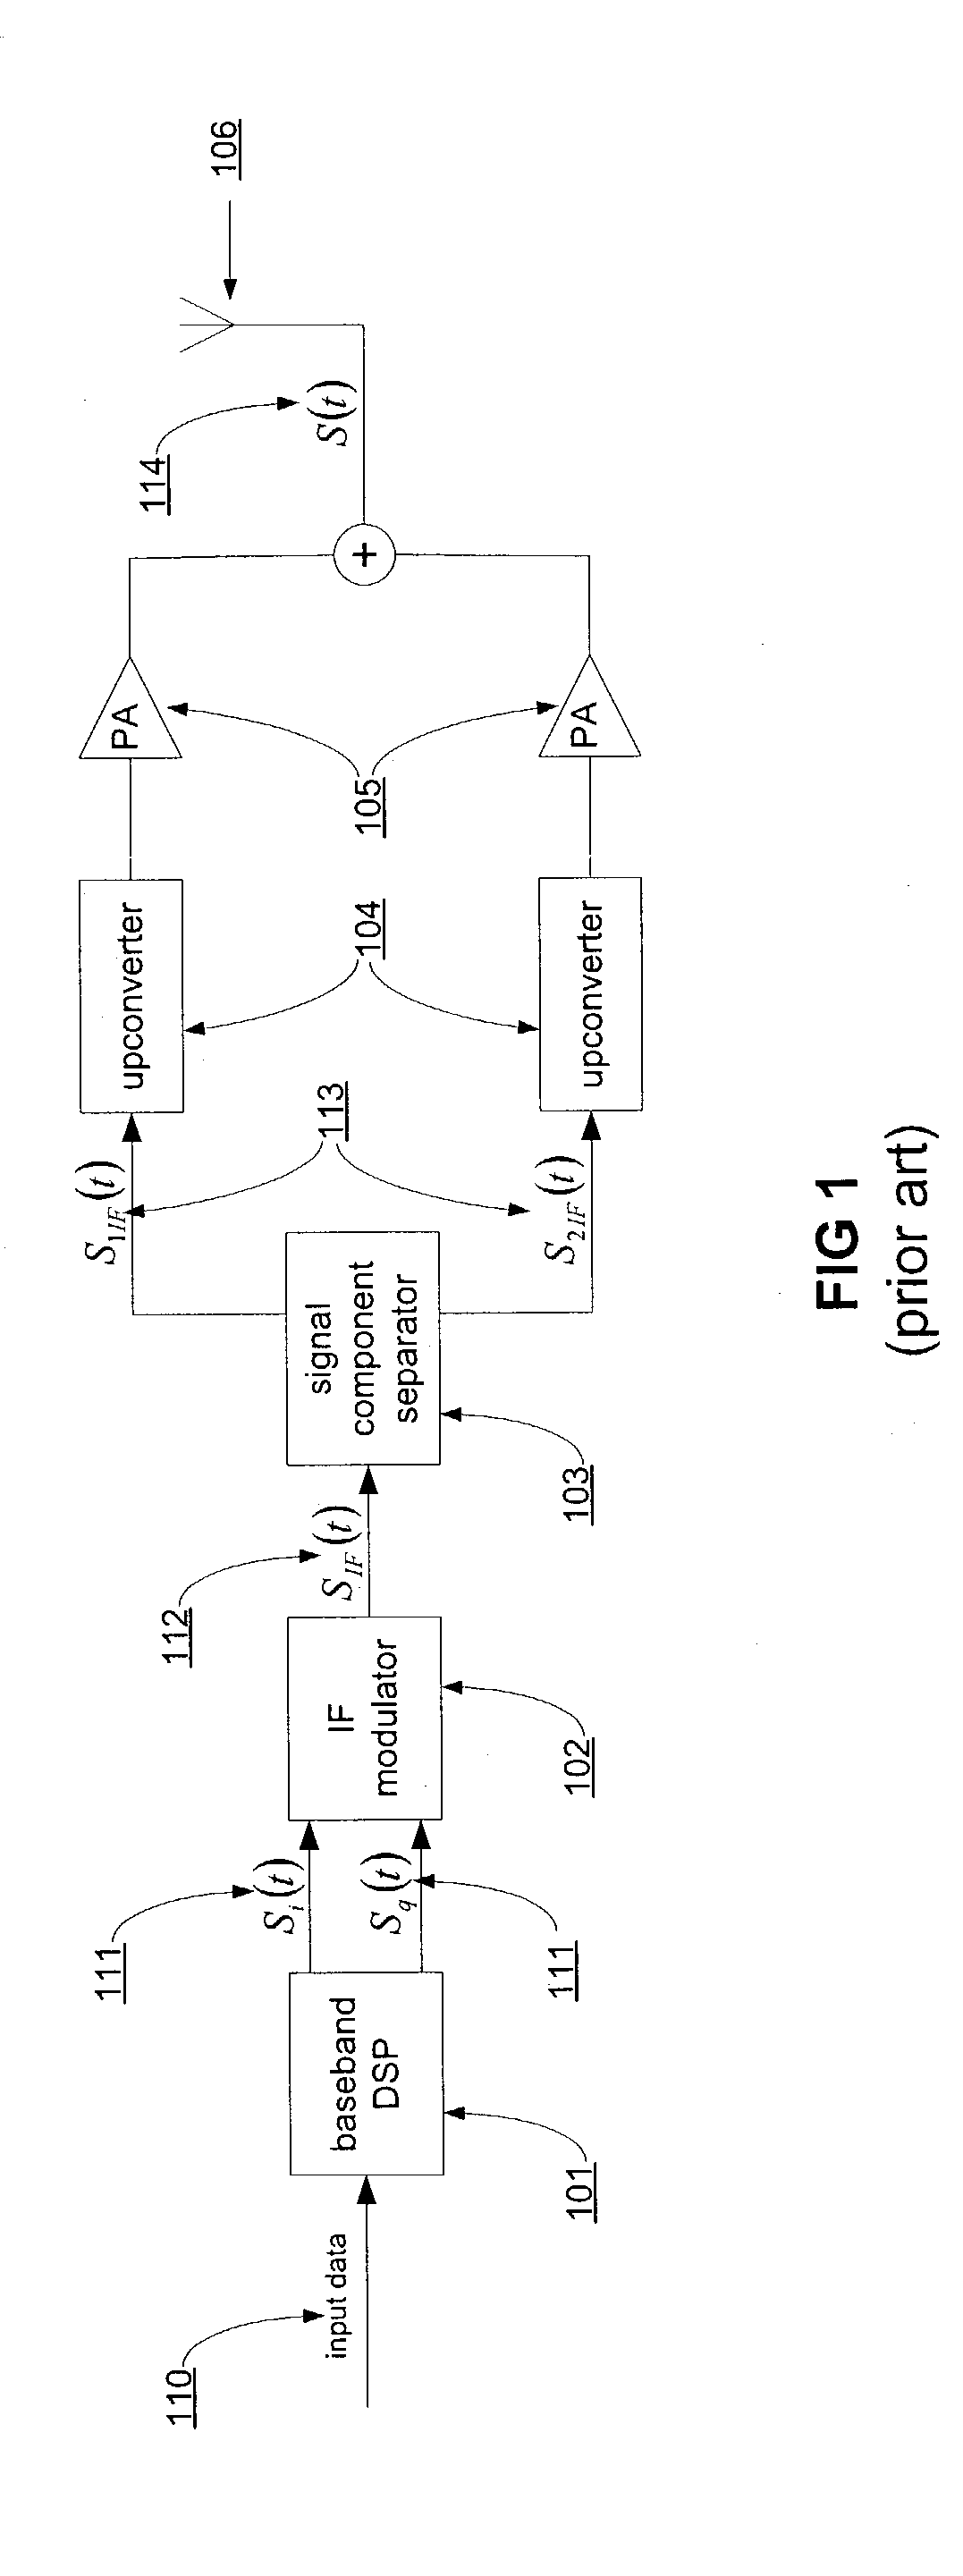 Phase shifted transmitter architecture for communication systems